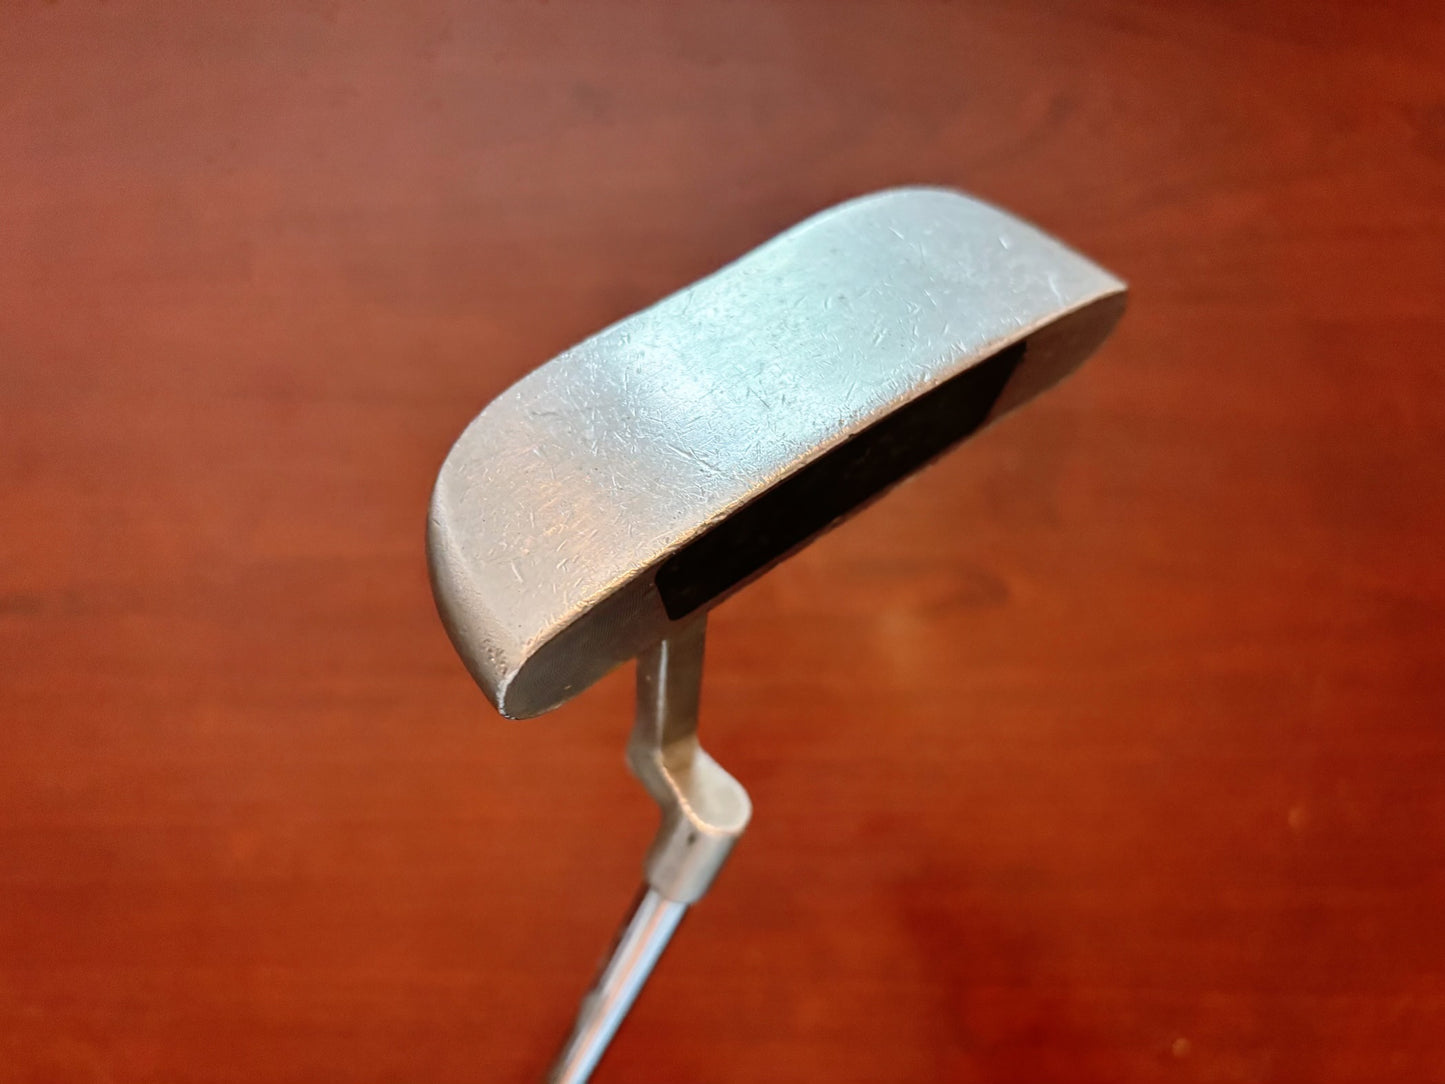 Odyssey Dual Force DF 990 Putter